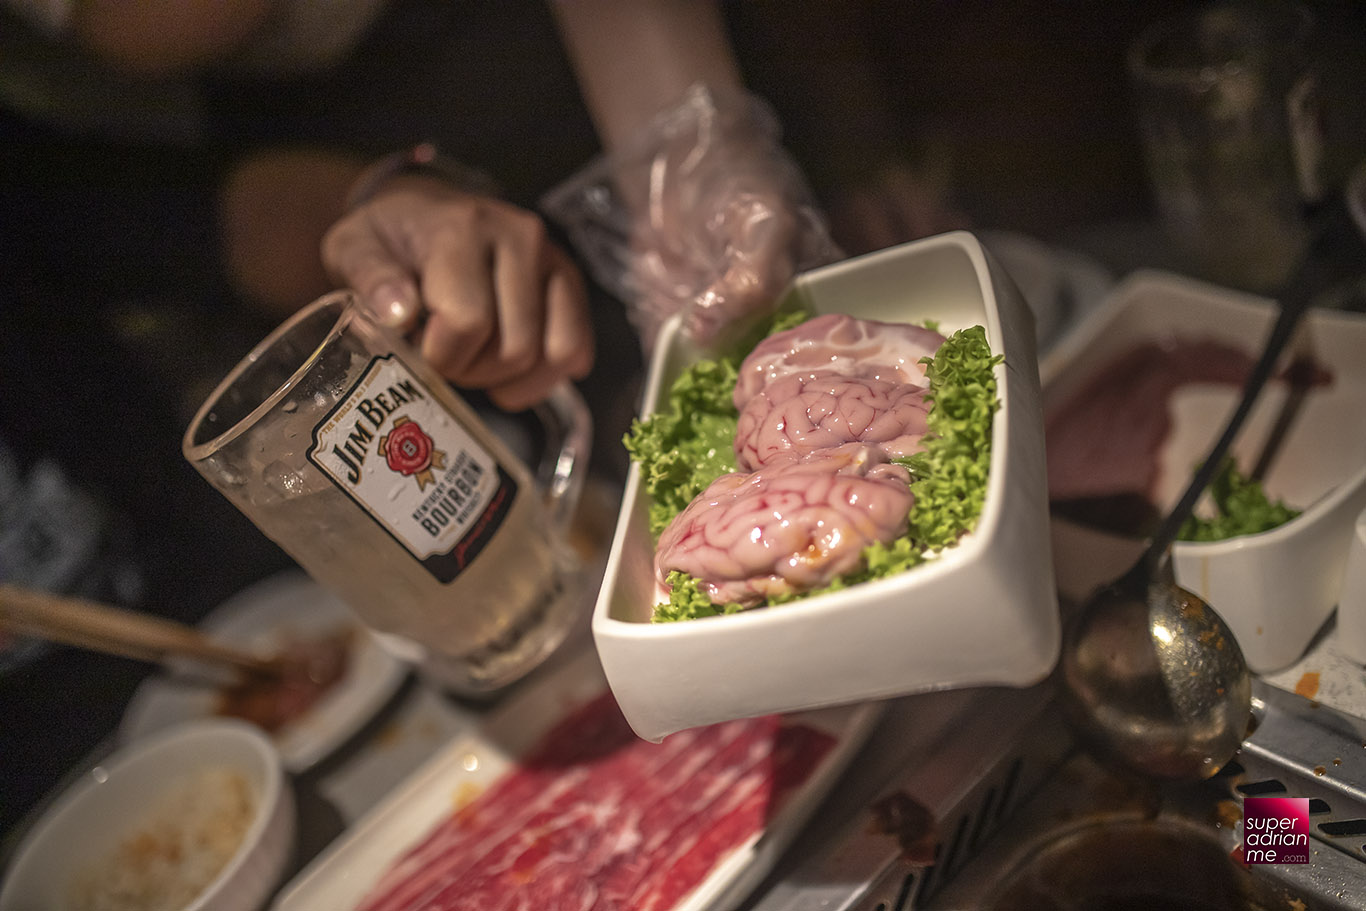 Try out some of the creamy pig's brains with Jim Beam Highball